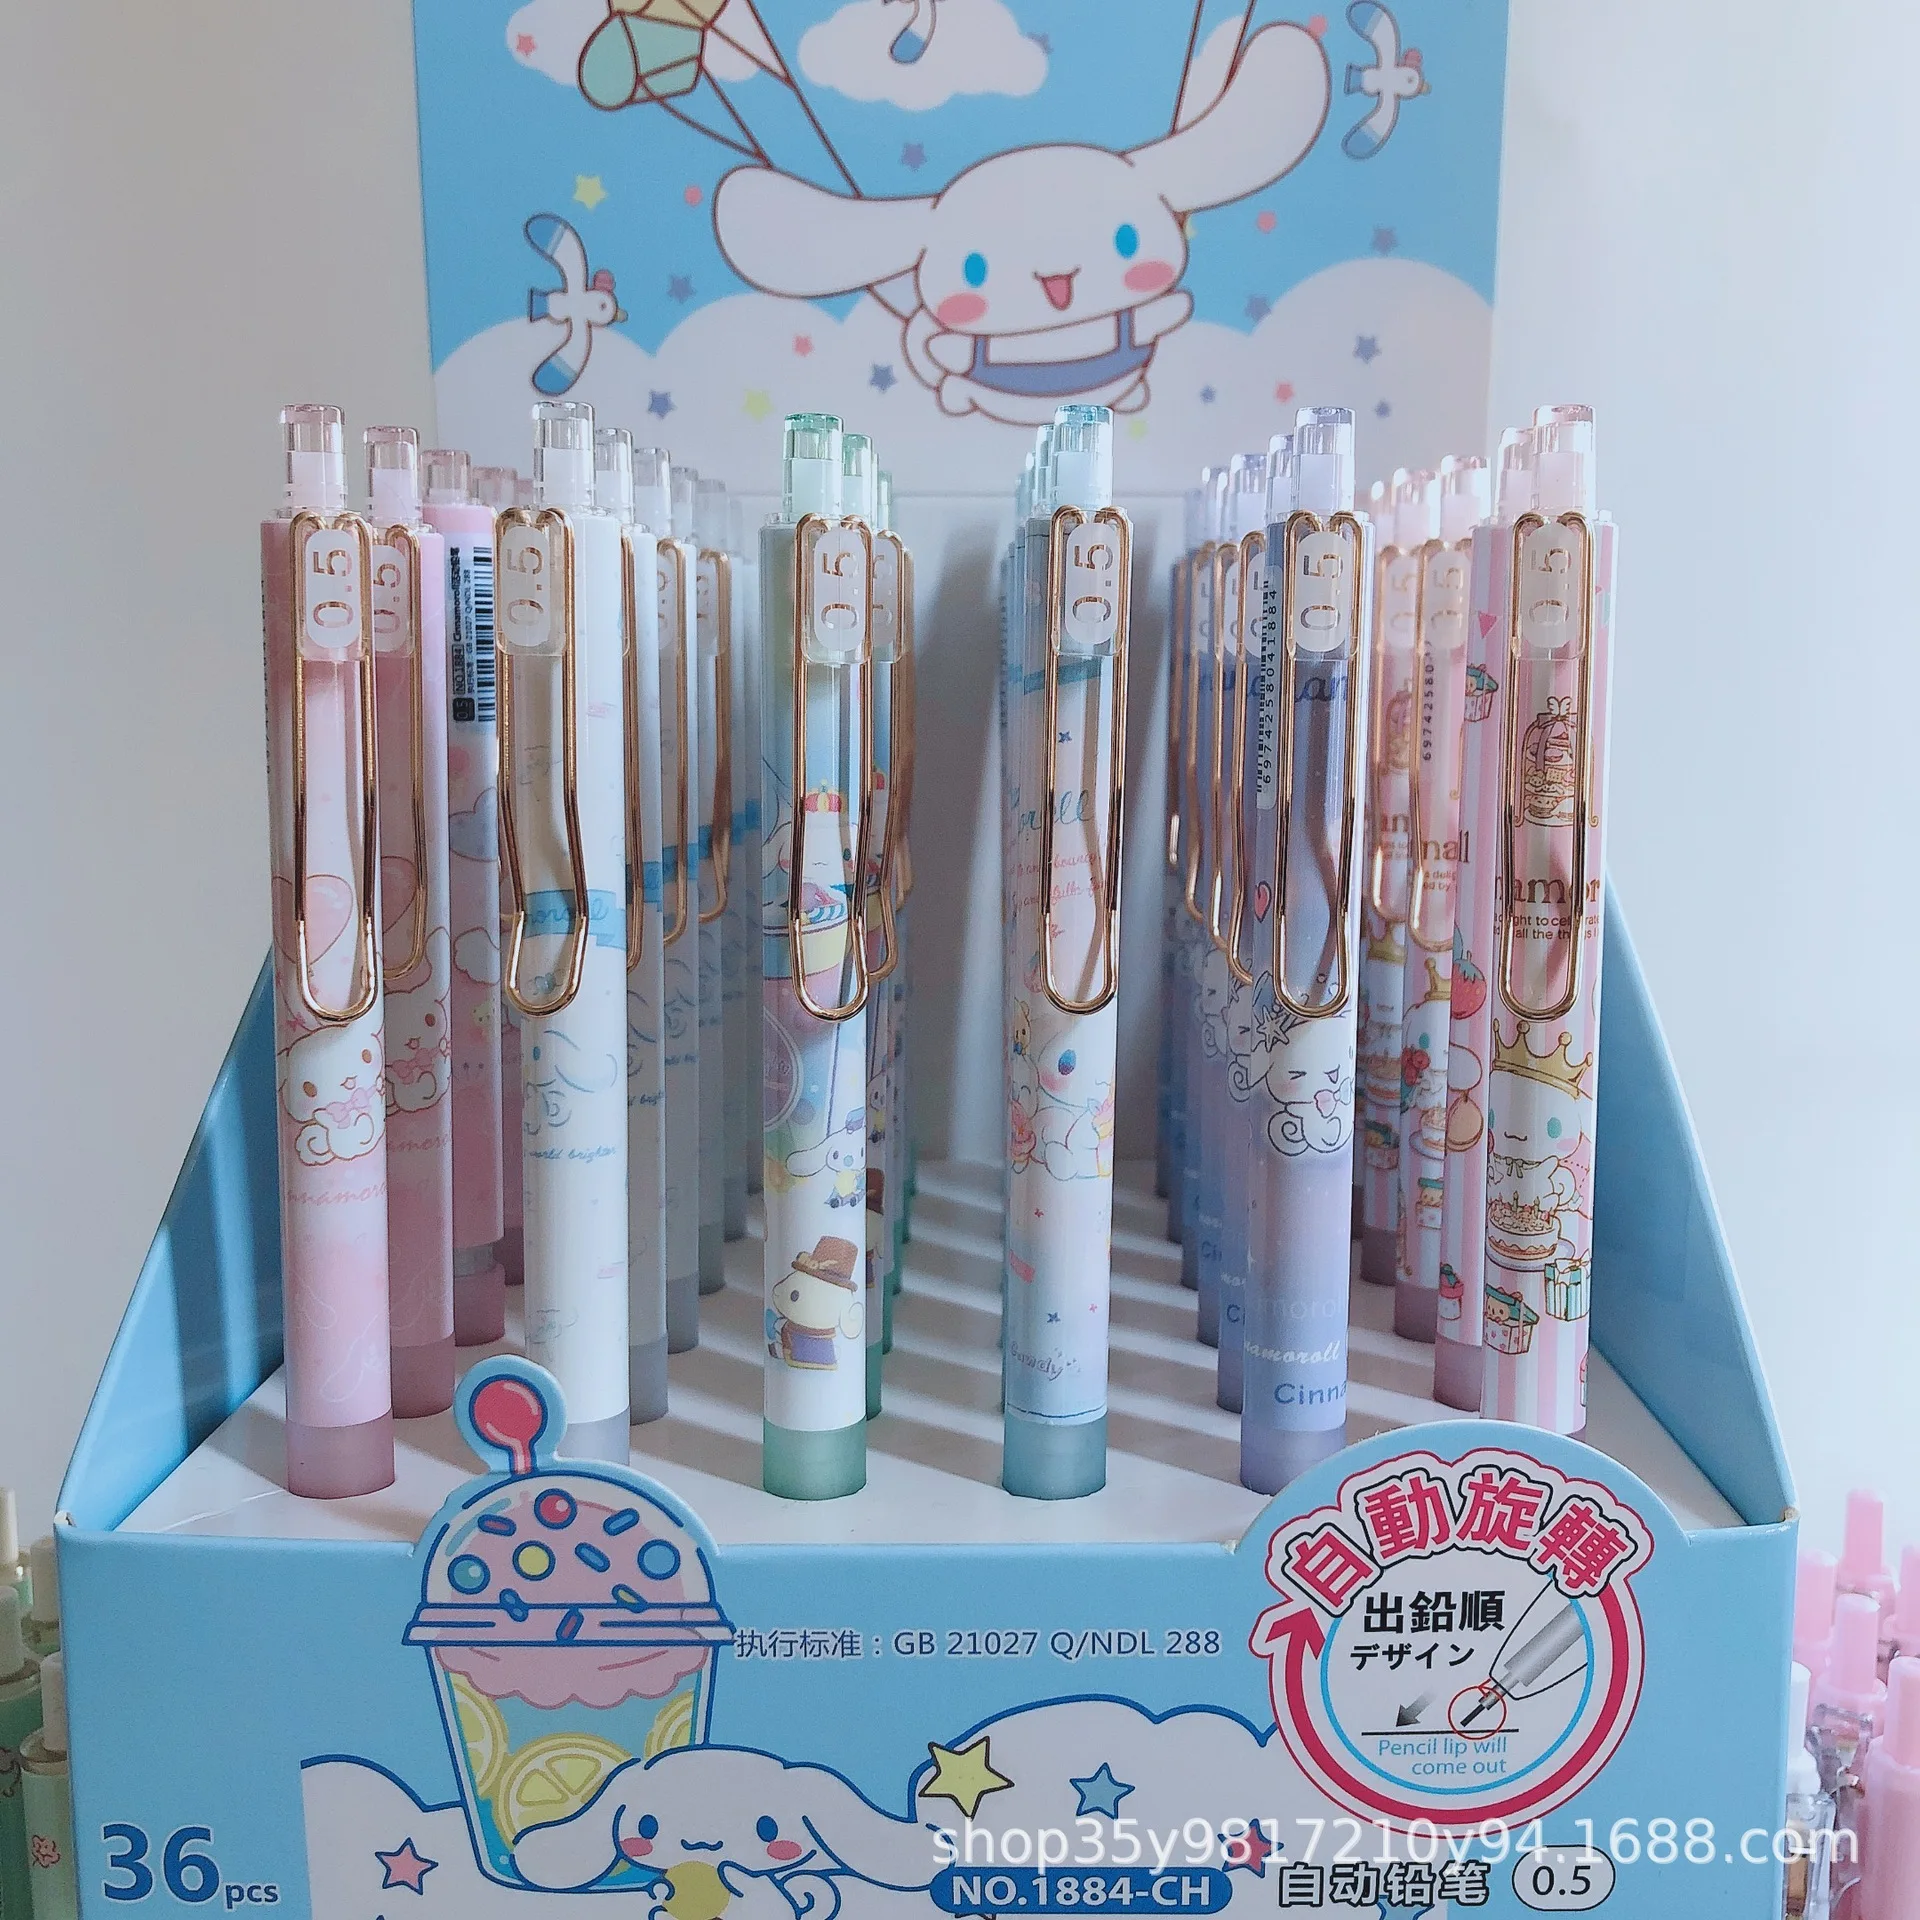 Sanrio neutral pen kawaii Cinnamoroll series cartoon touch pen lovely student stationery school supplies children's gifts lovely peanut shaped crayons set for kids professional painting supplies gift for birthday